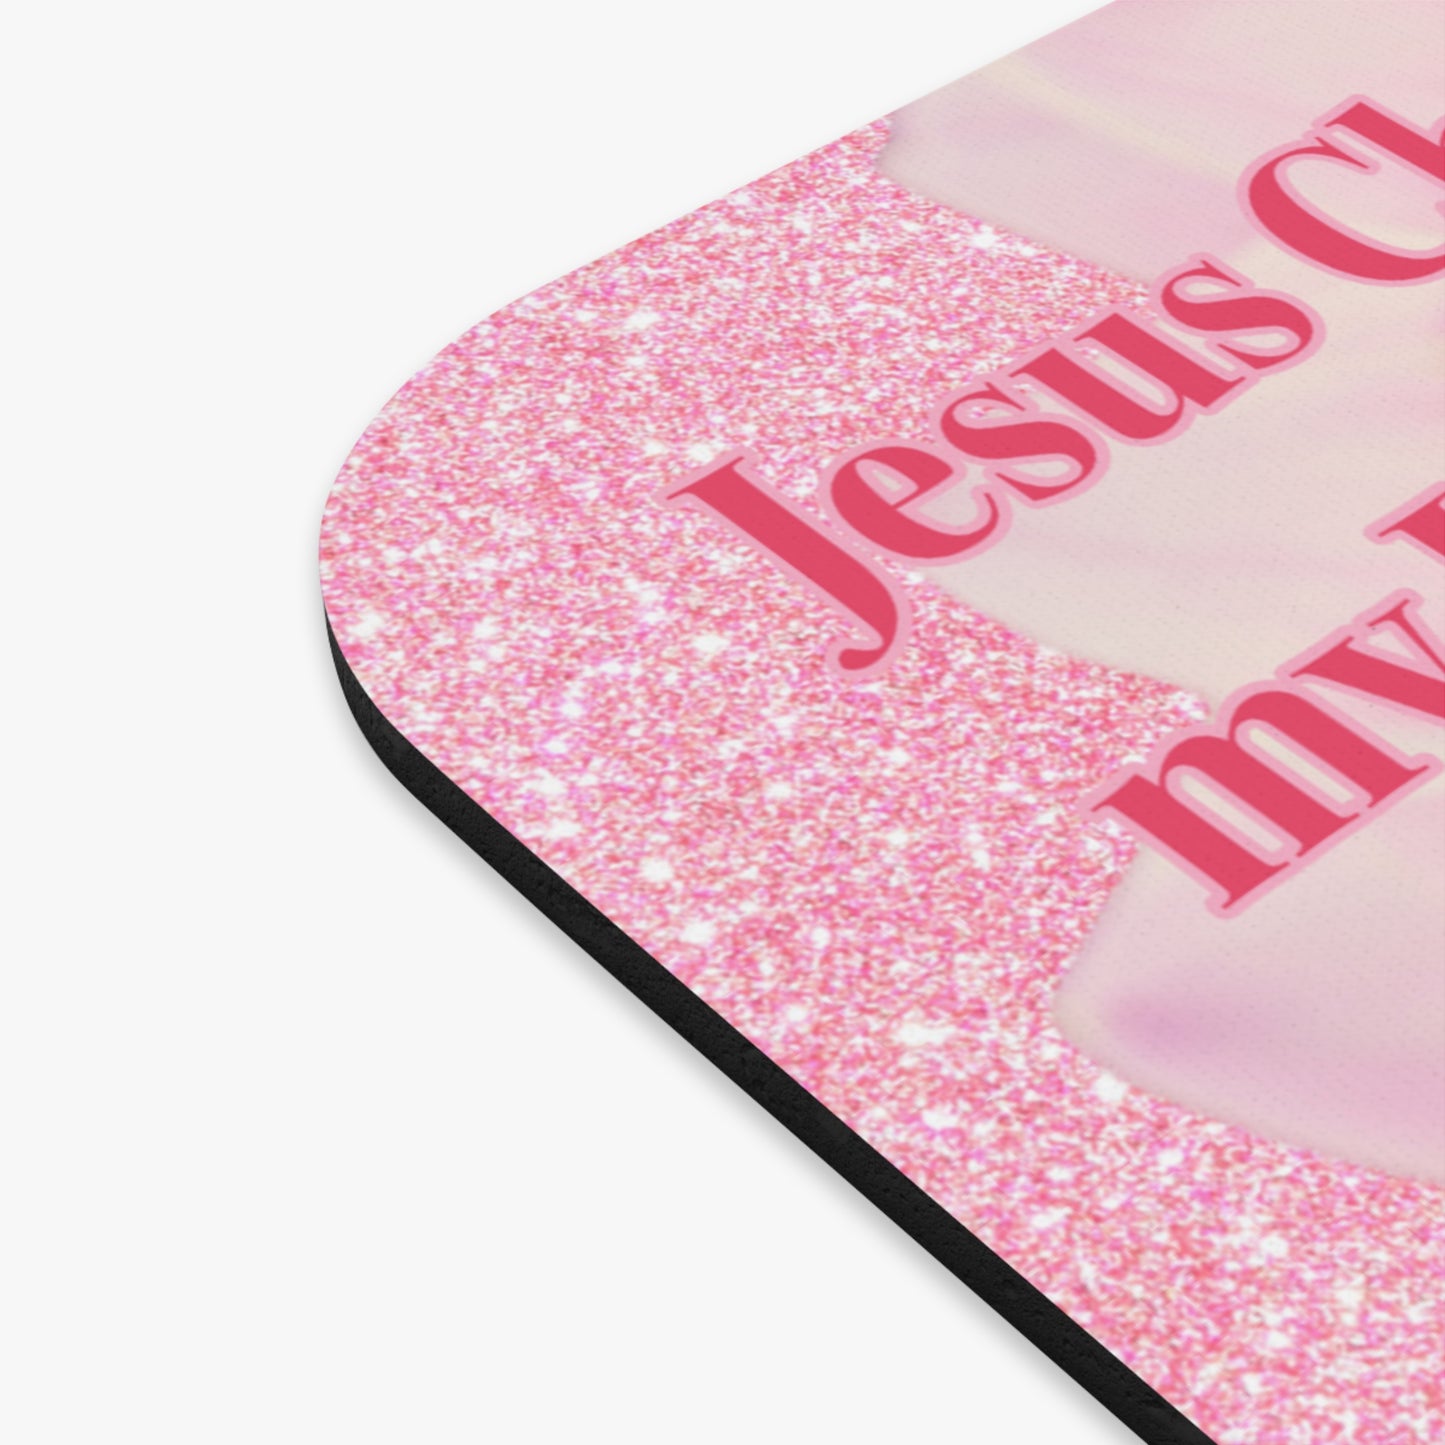 Mouse Pad (Rectangle) - Jesus Christ, My Living Hope - Pink Blossom